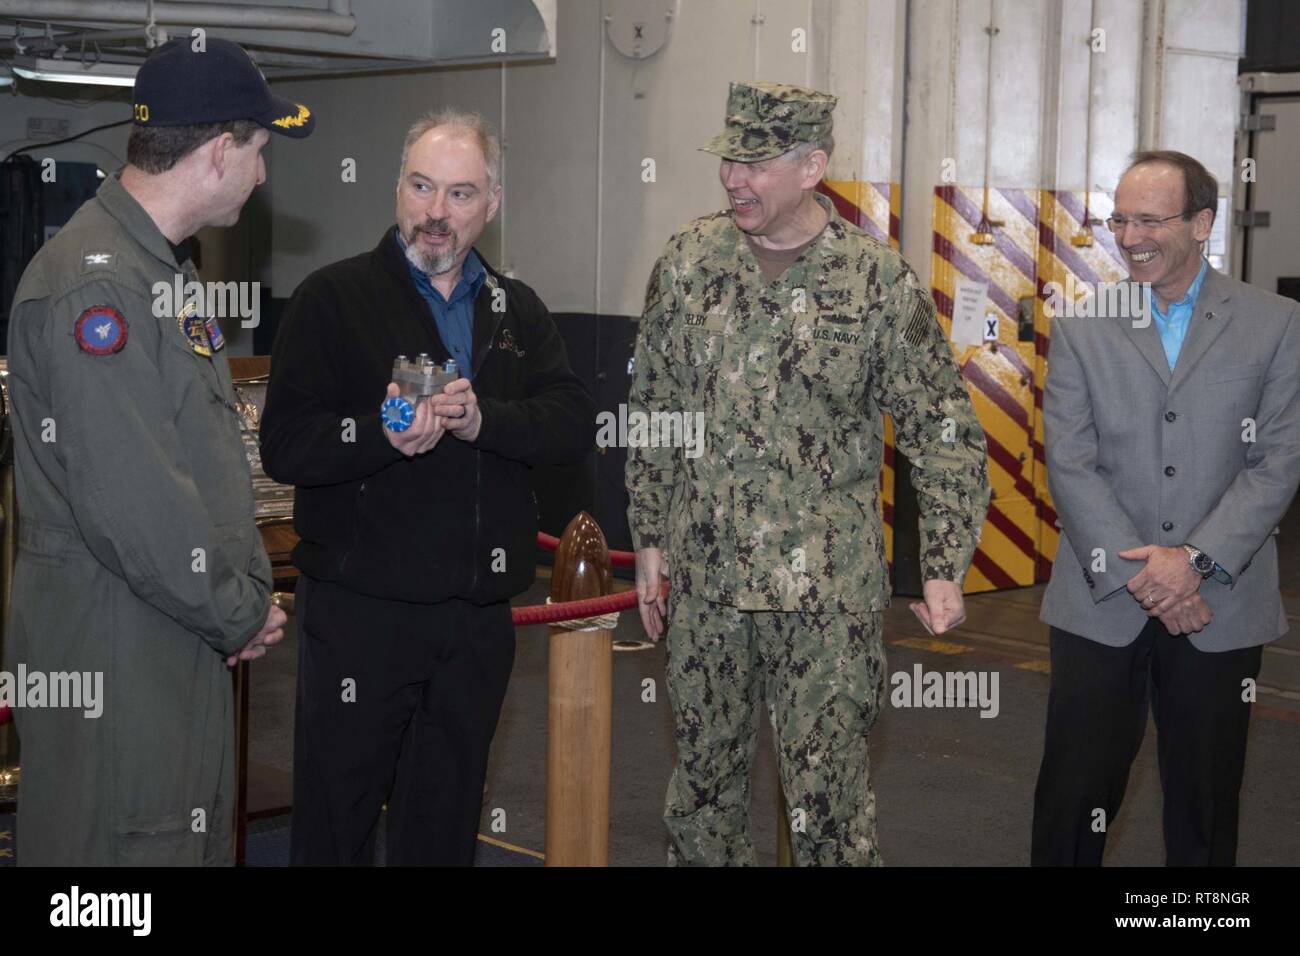 NORFOLK, Va. (Jan. 29, 2019) Mr. John Otis, the Maintenance Program Manager assigned to USS Harry S. Truman (CVN 75), discusses the first 3-D printed metal part for installation and use on a U.S. Navy aircraft carrier with Truman Commanding Officer, Capt. Nicholas Dienna, left, and Naval Sea Systems Command Chief Engineer and Deputy Commander for Ship Design, Integration, and Naval Engineering, Rear Adm. Lorin Selby, during a presentation ceremony aboard Truman. The piping assembly, manufactured by Huntington Ingalls Industries, will be installed and evaluated for a one-year period. Stock Photo